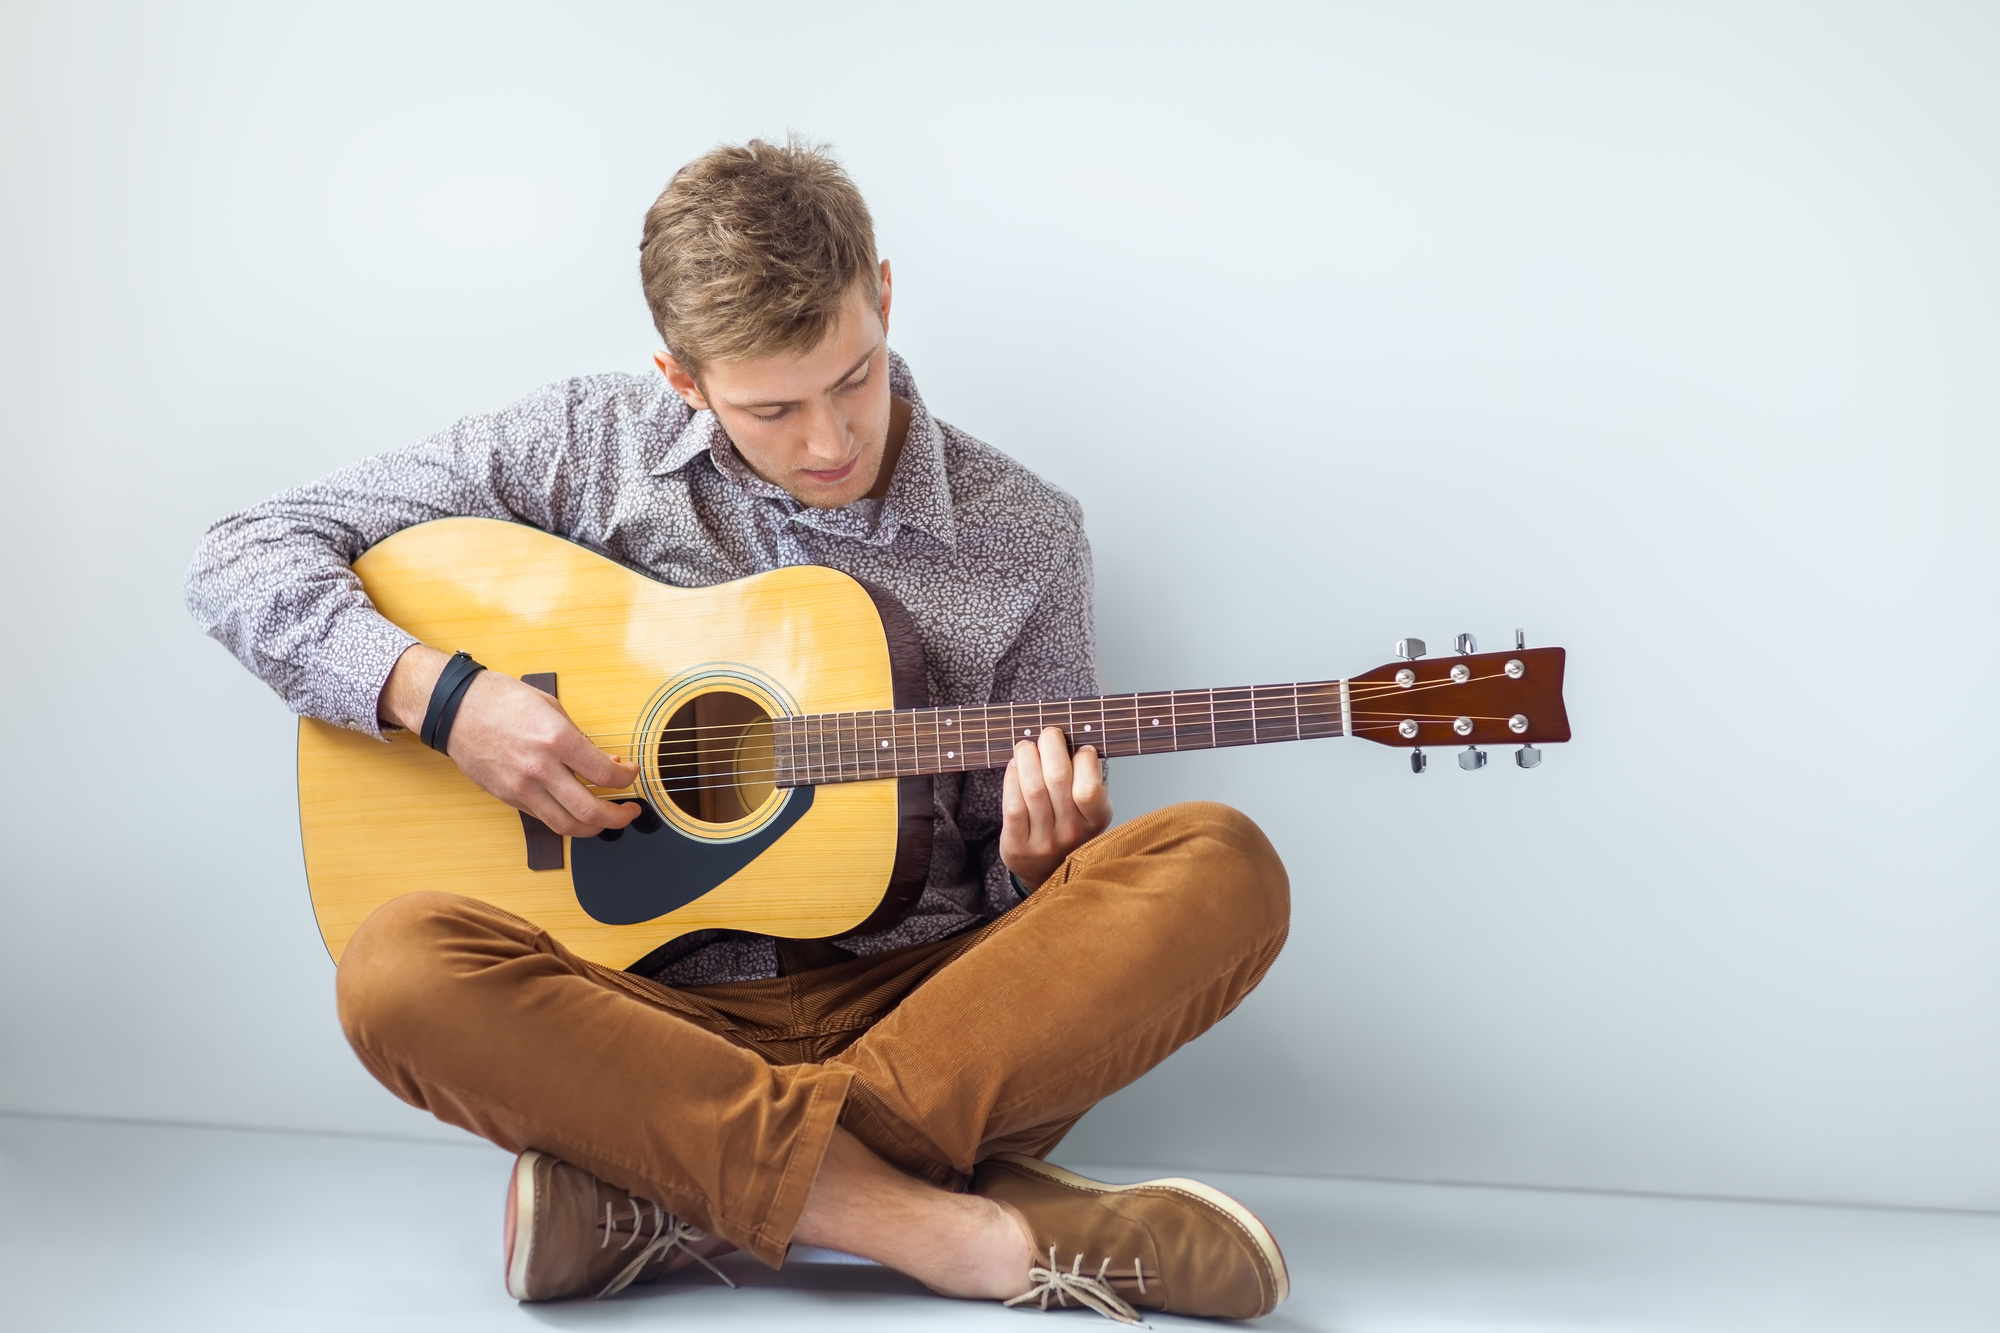 8 Benefits of Enrolling in Guitar Lessons